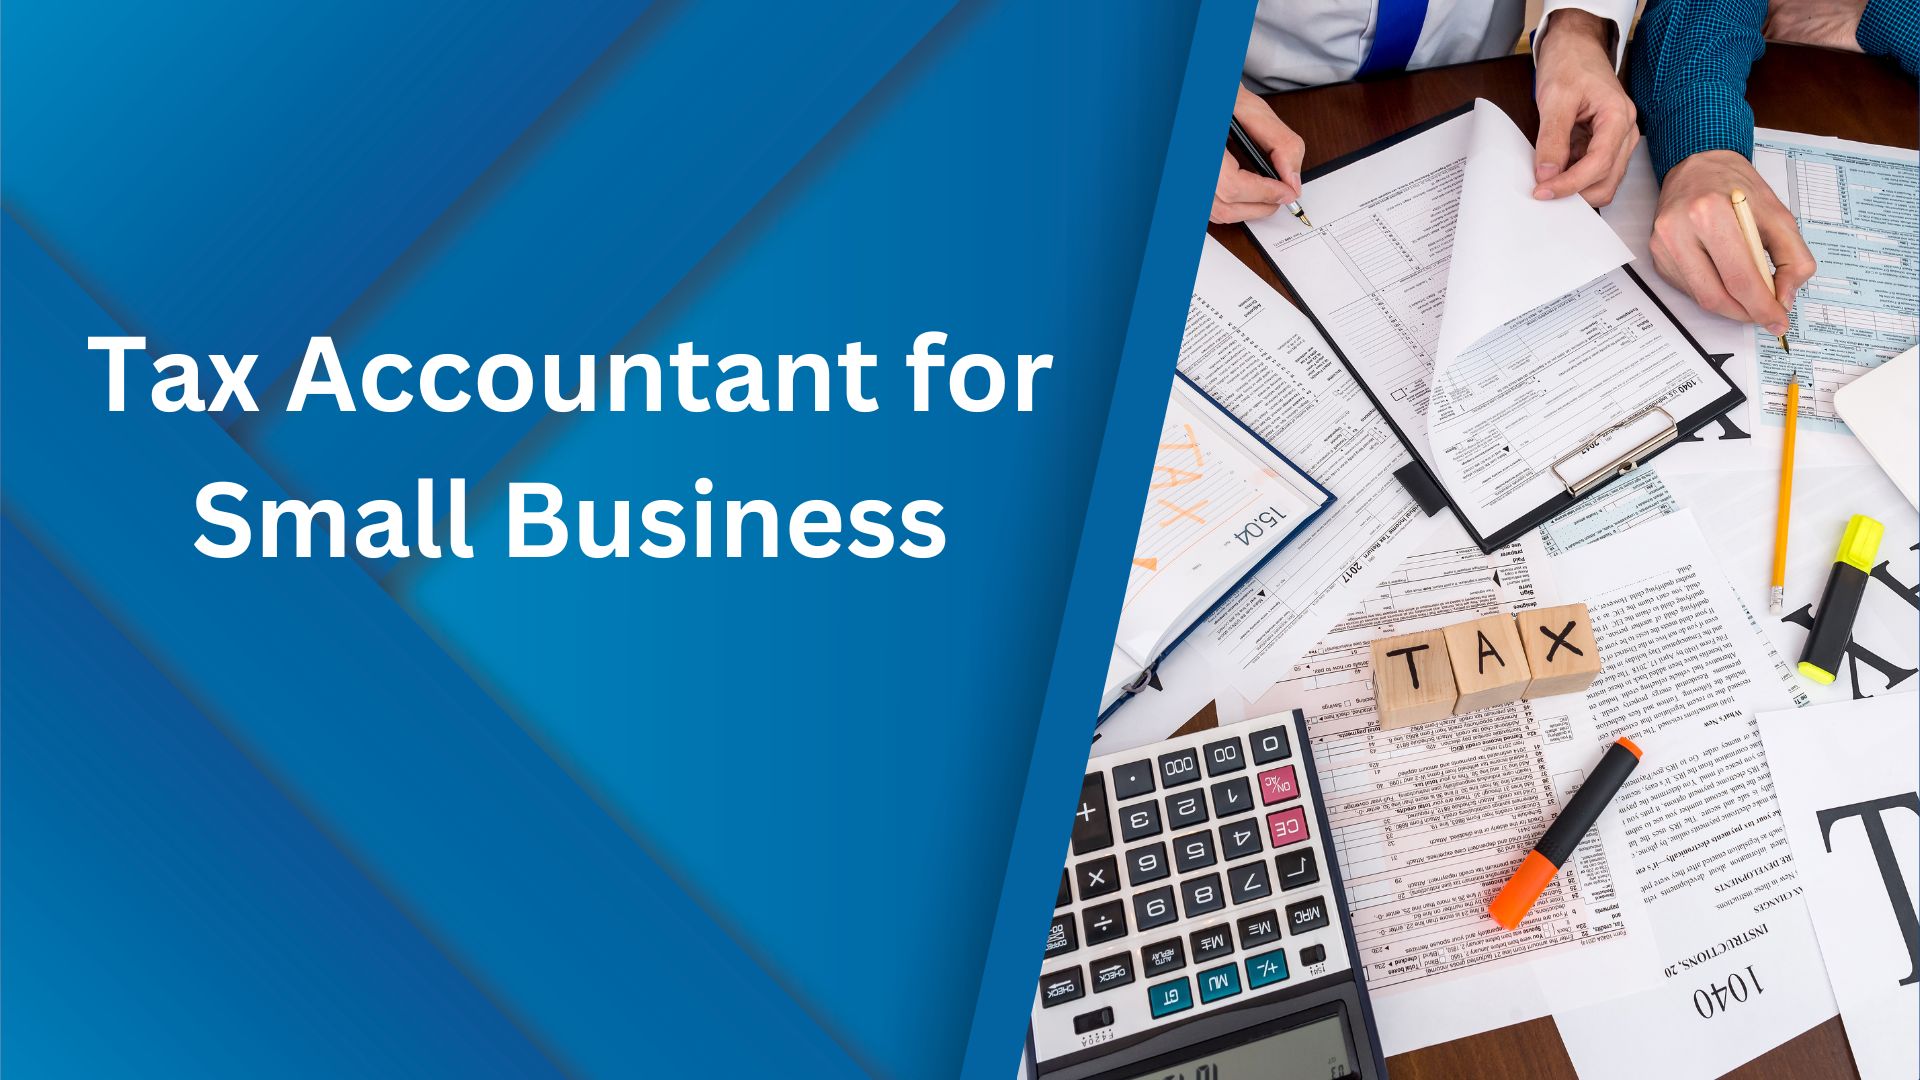 Tax Accountant for Small Business